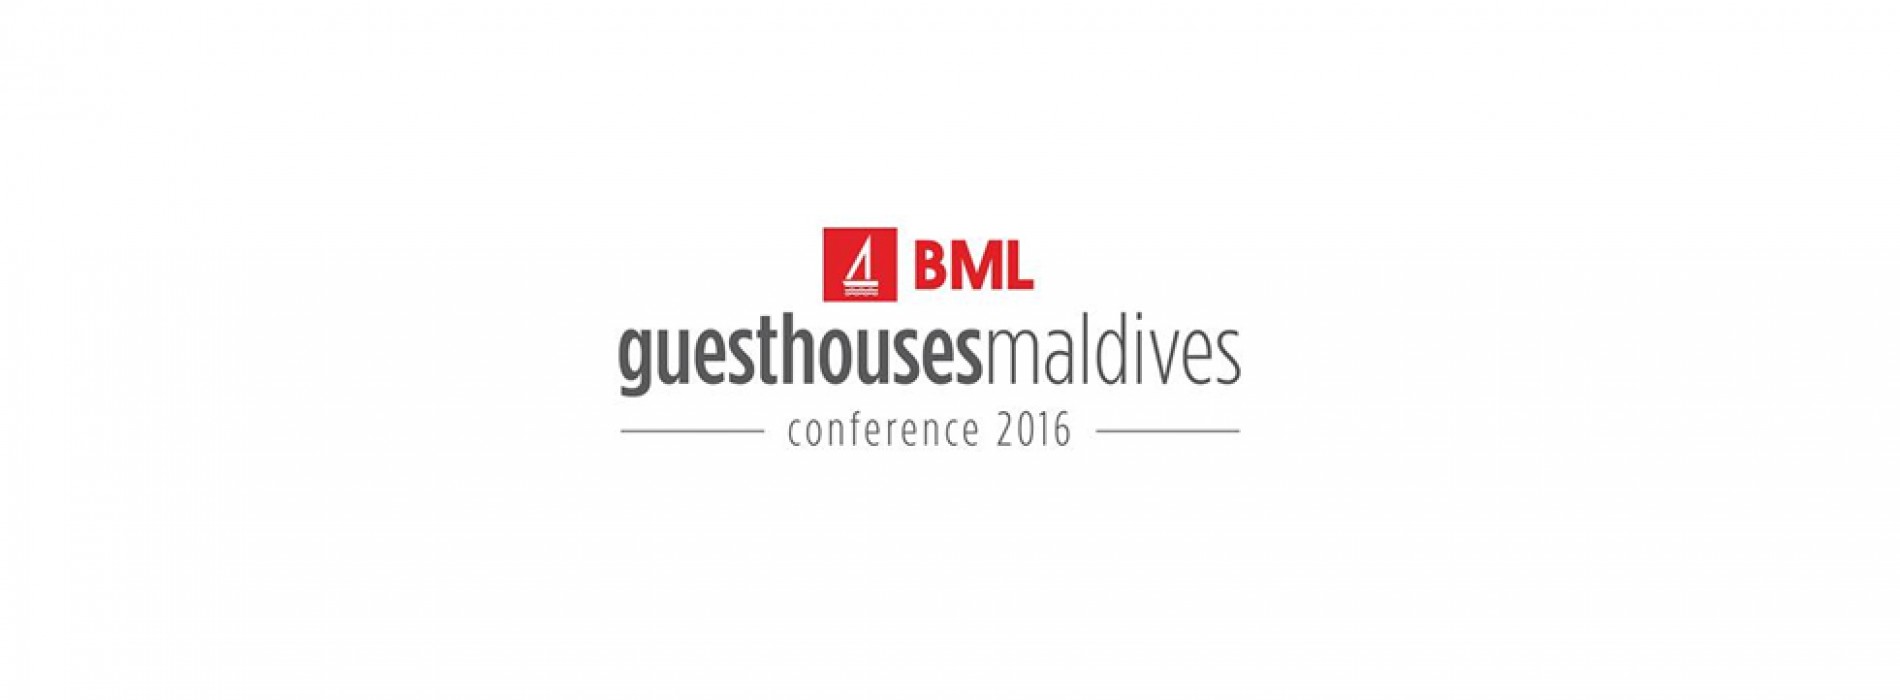 Guesthouse Maldives Conference 2016